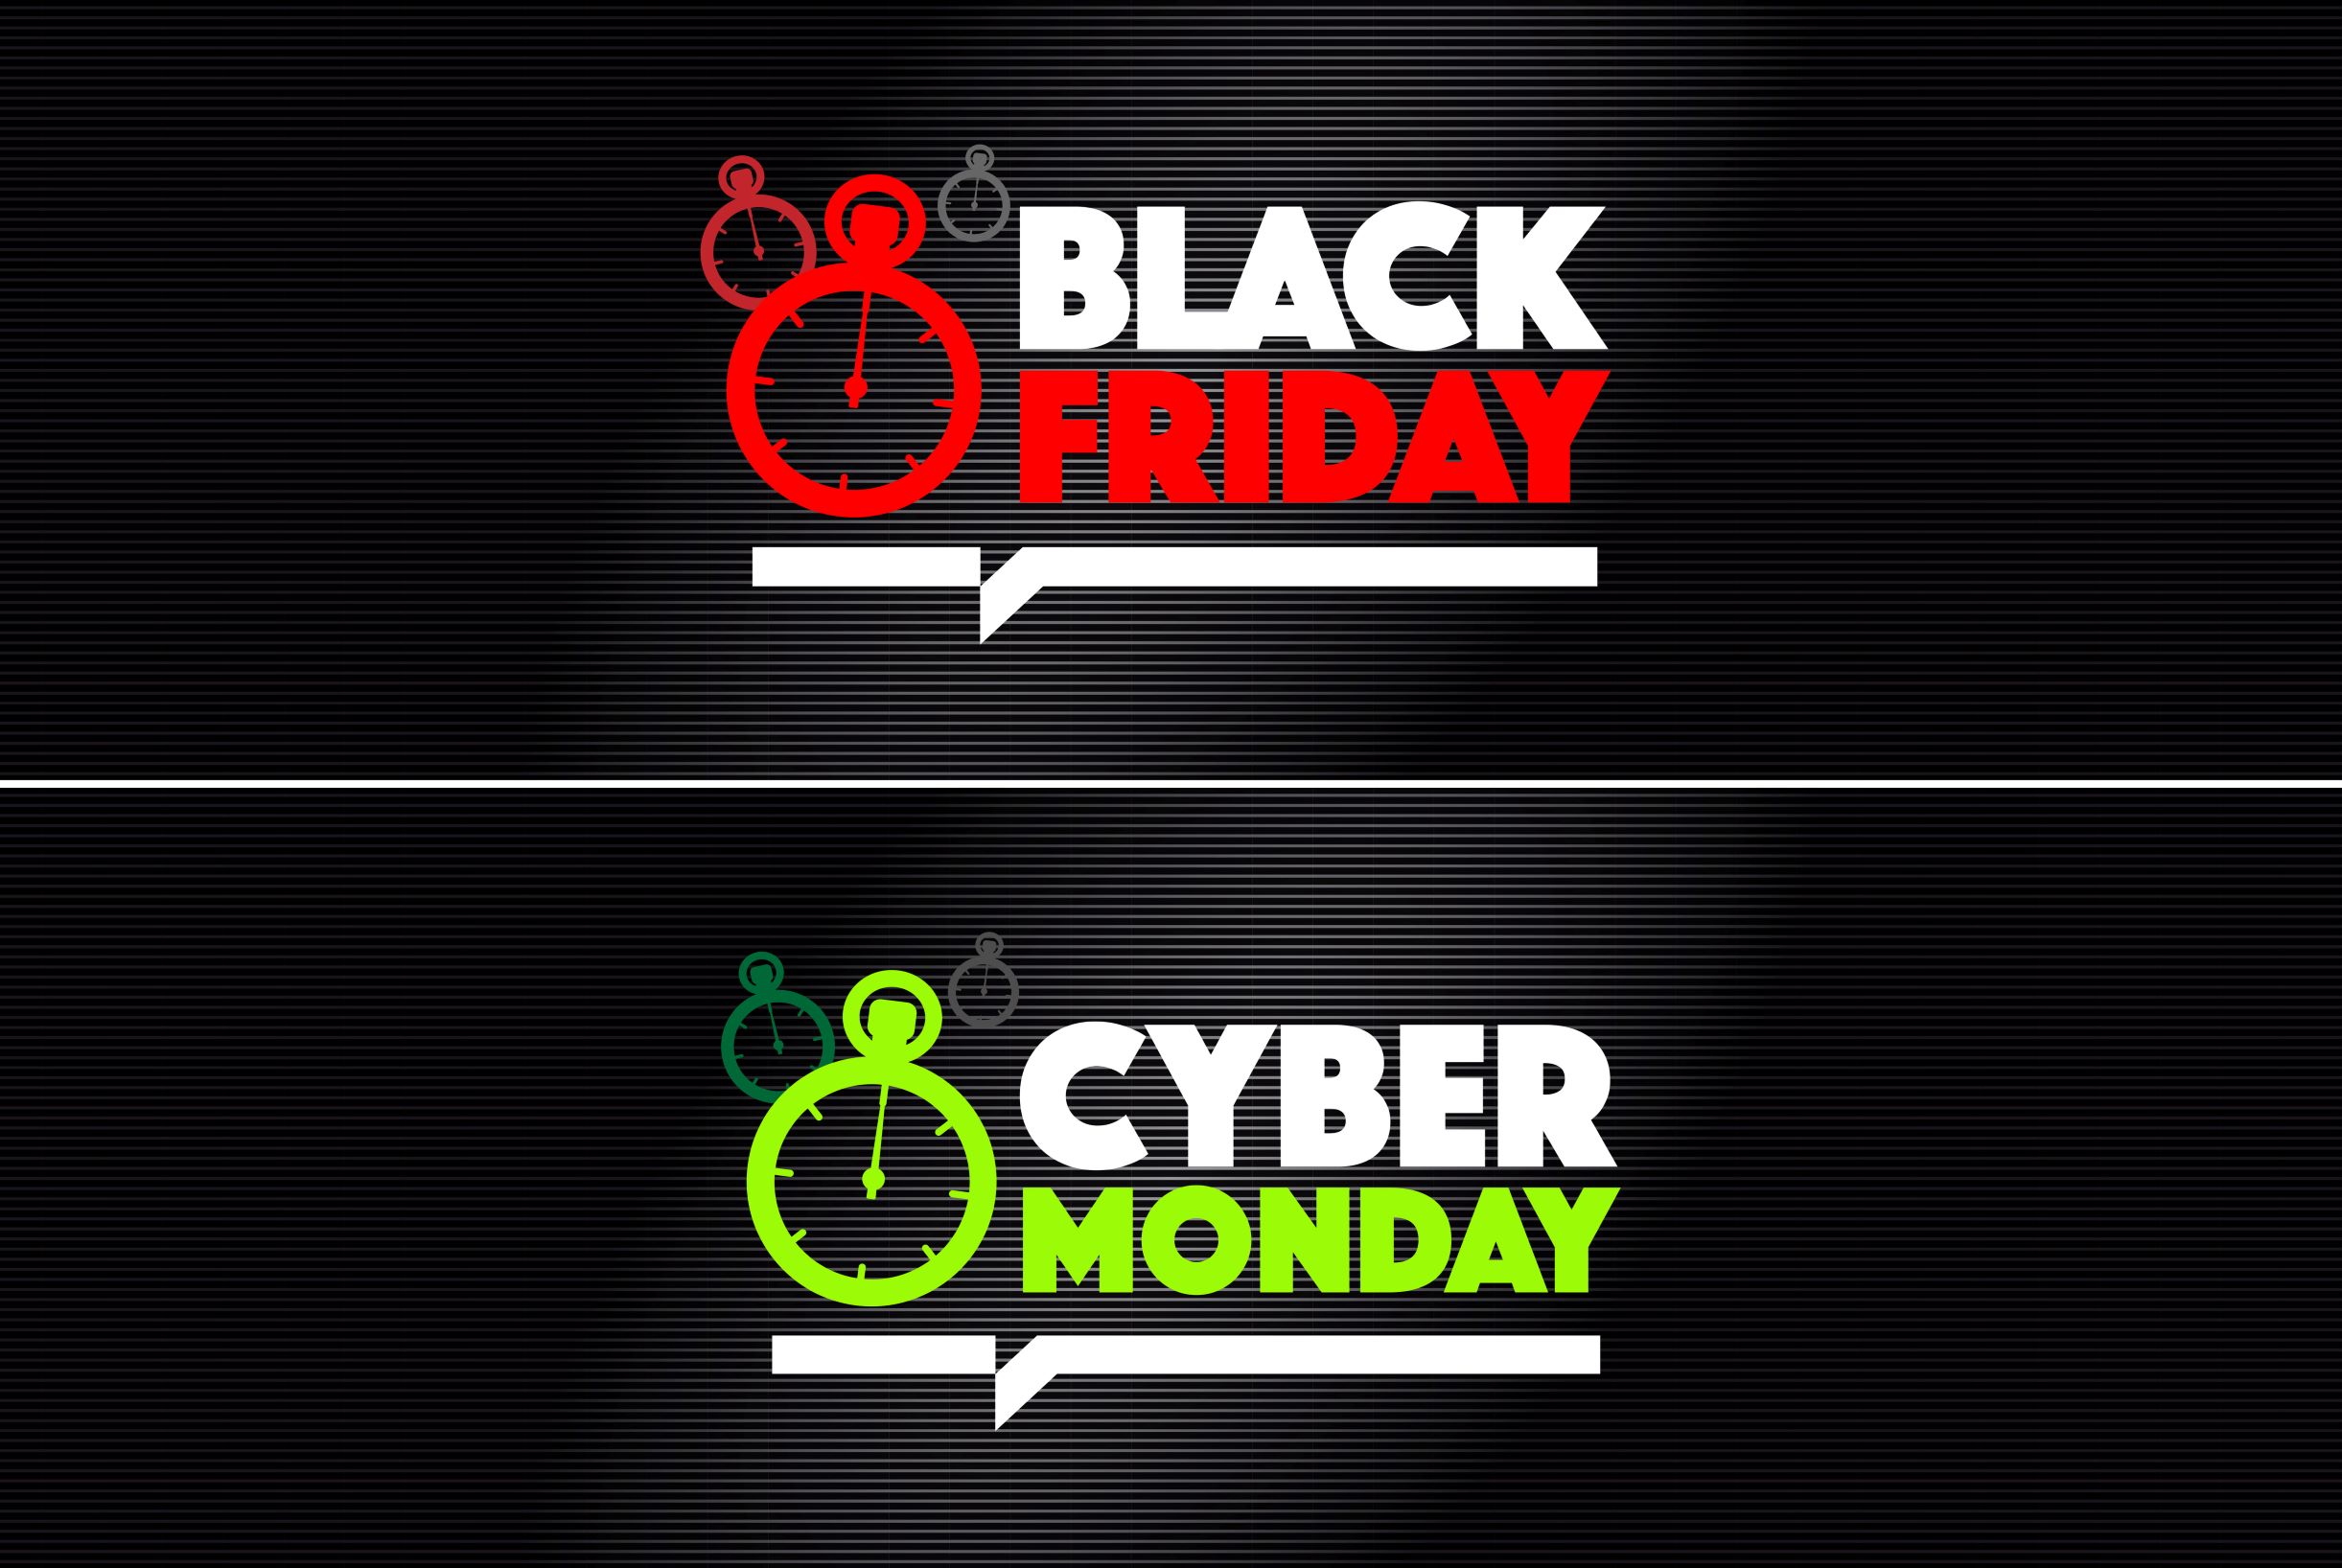 Black Friday and Cyber Monday: Are they so different?